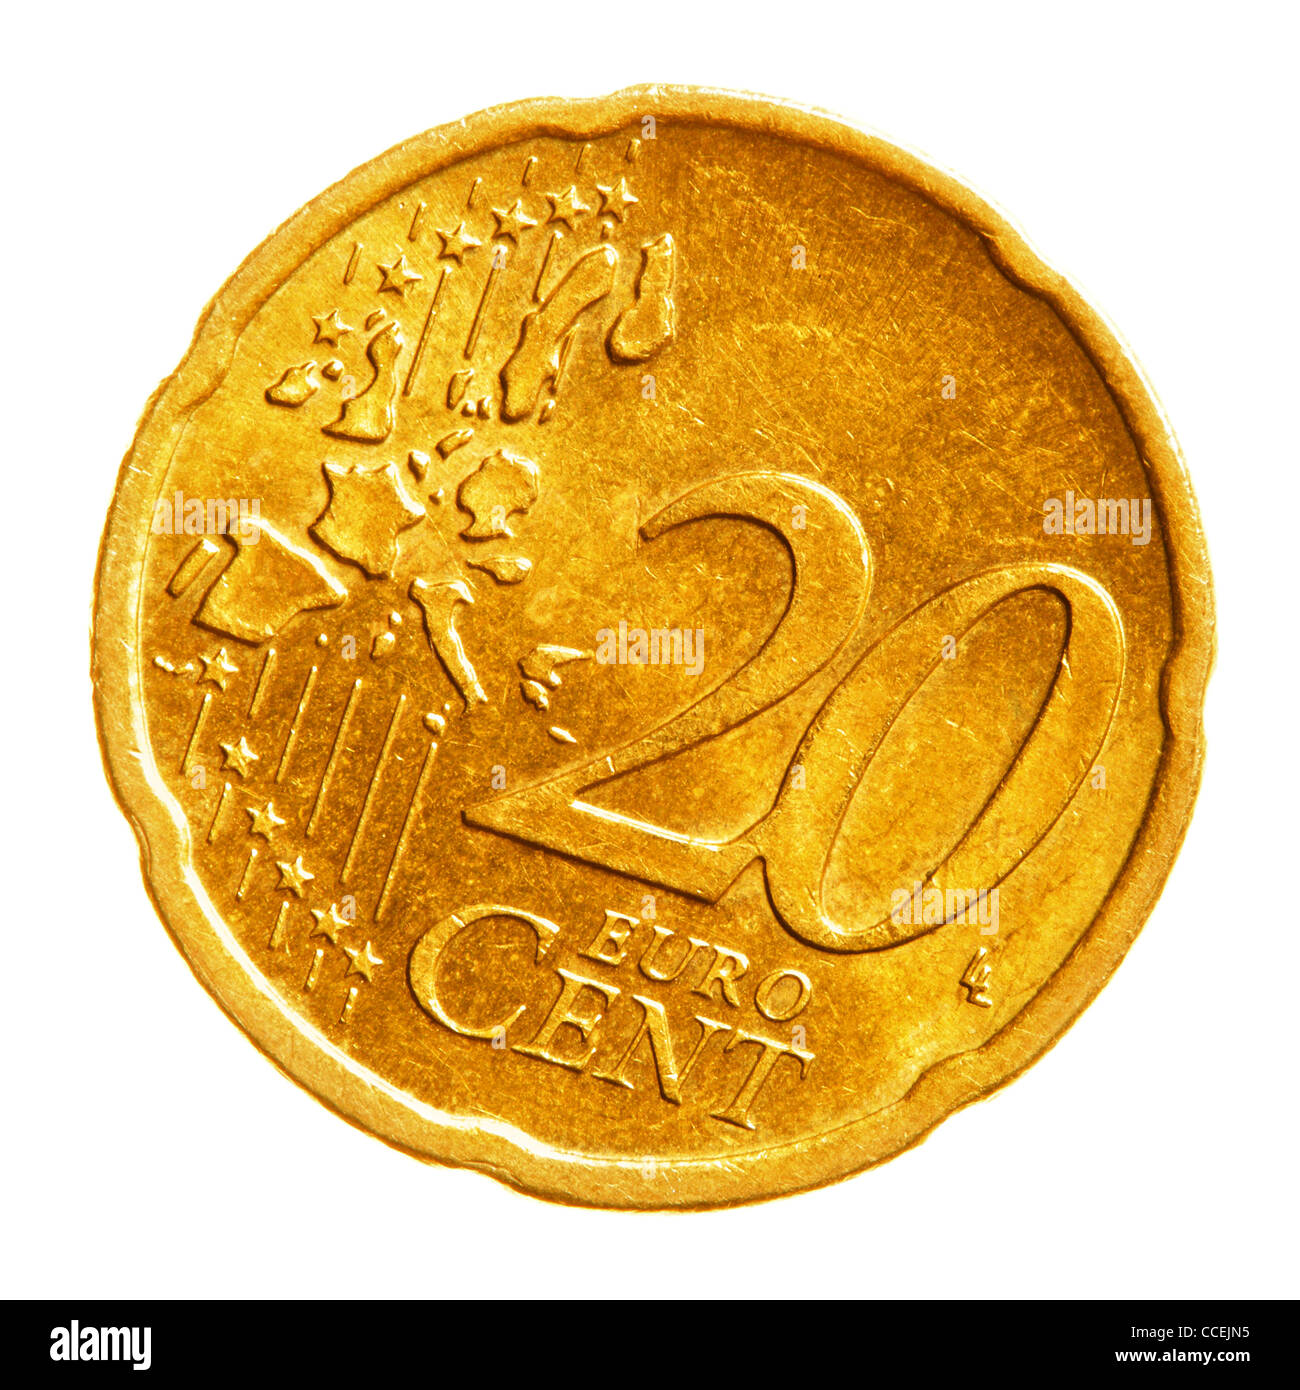 Twenty euro cents coin isolated over white background Stock Photo